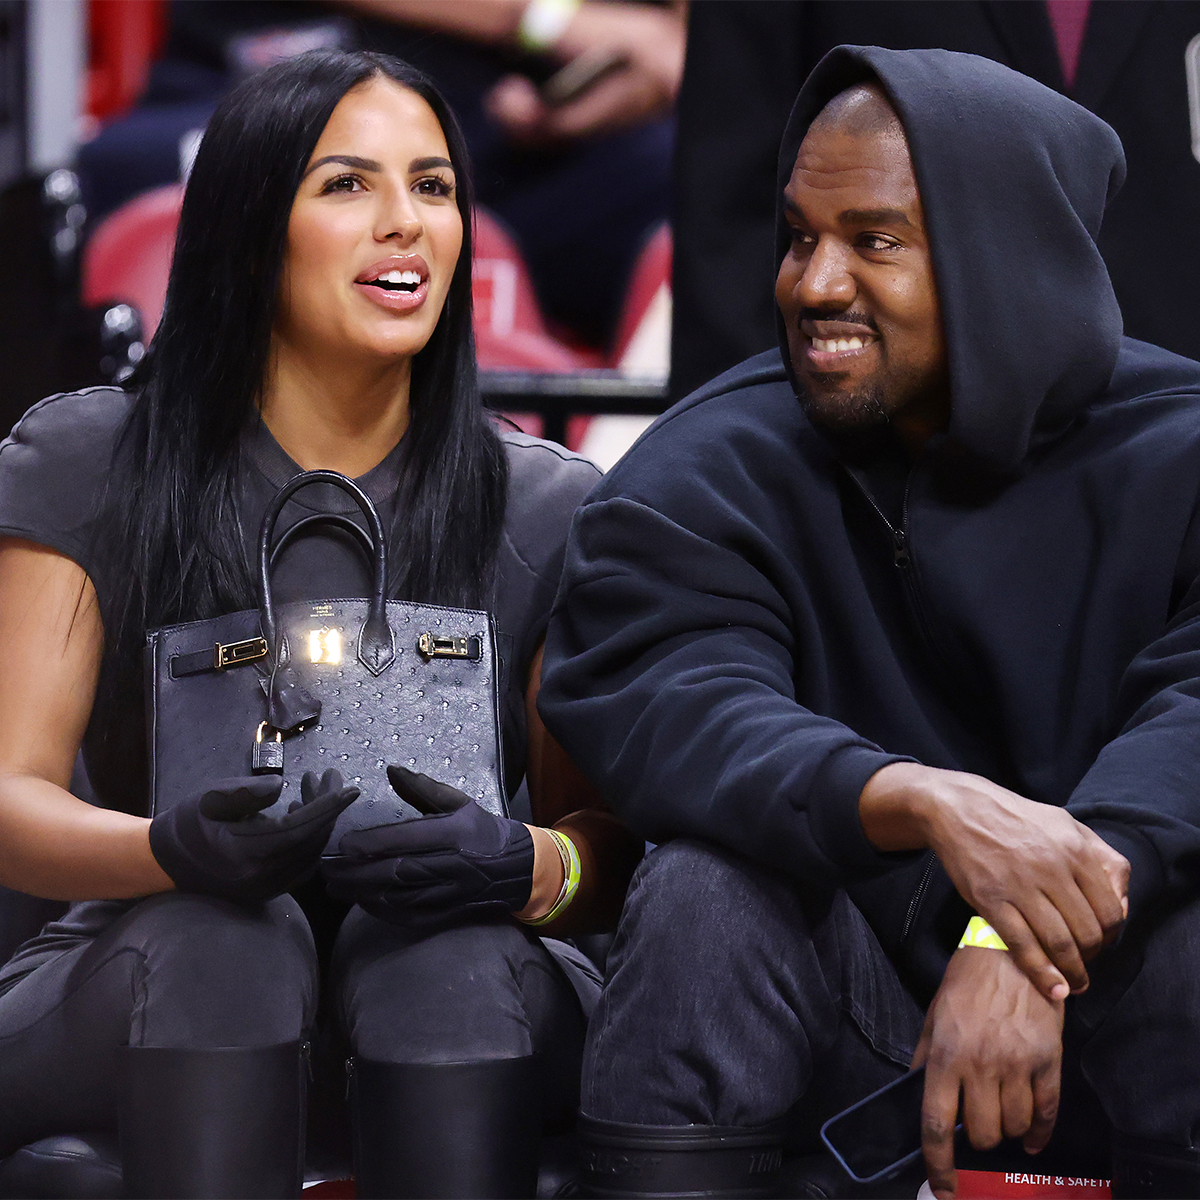 Kanye West and Chaney Jones Break Up After Nearly 5 Months Together